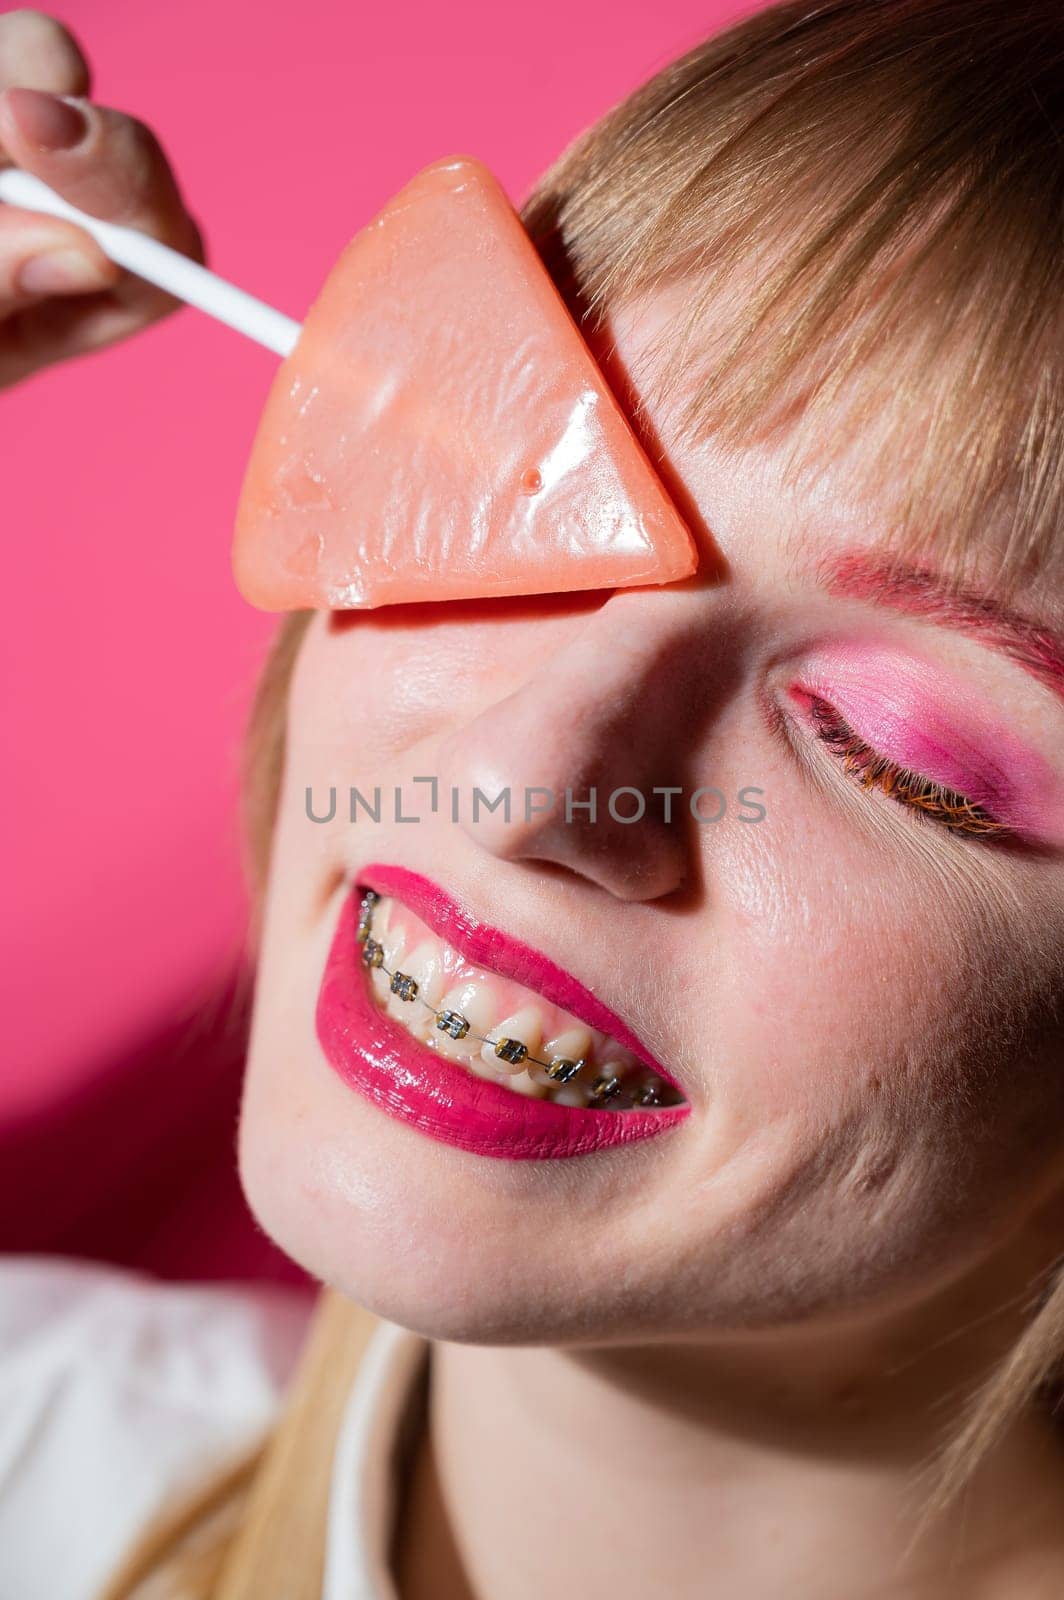 Portrait of a young woman with braces and bright makeup eating a lollipop on a pink background. Vertical photo. by mrwed54